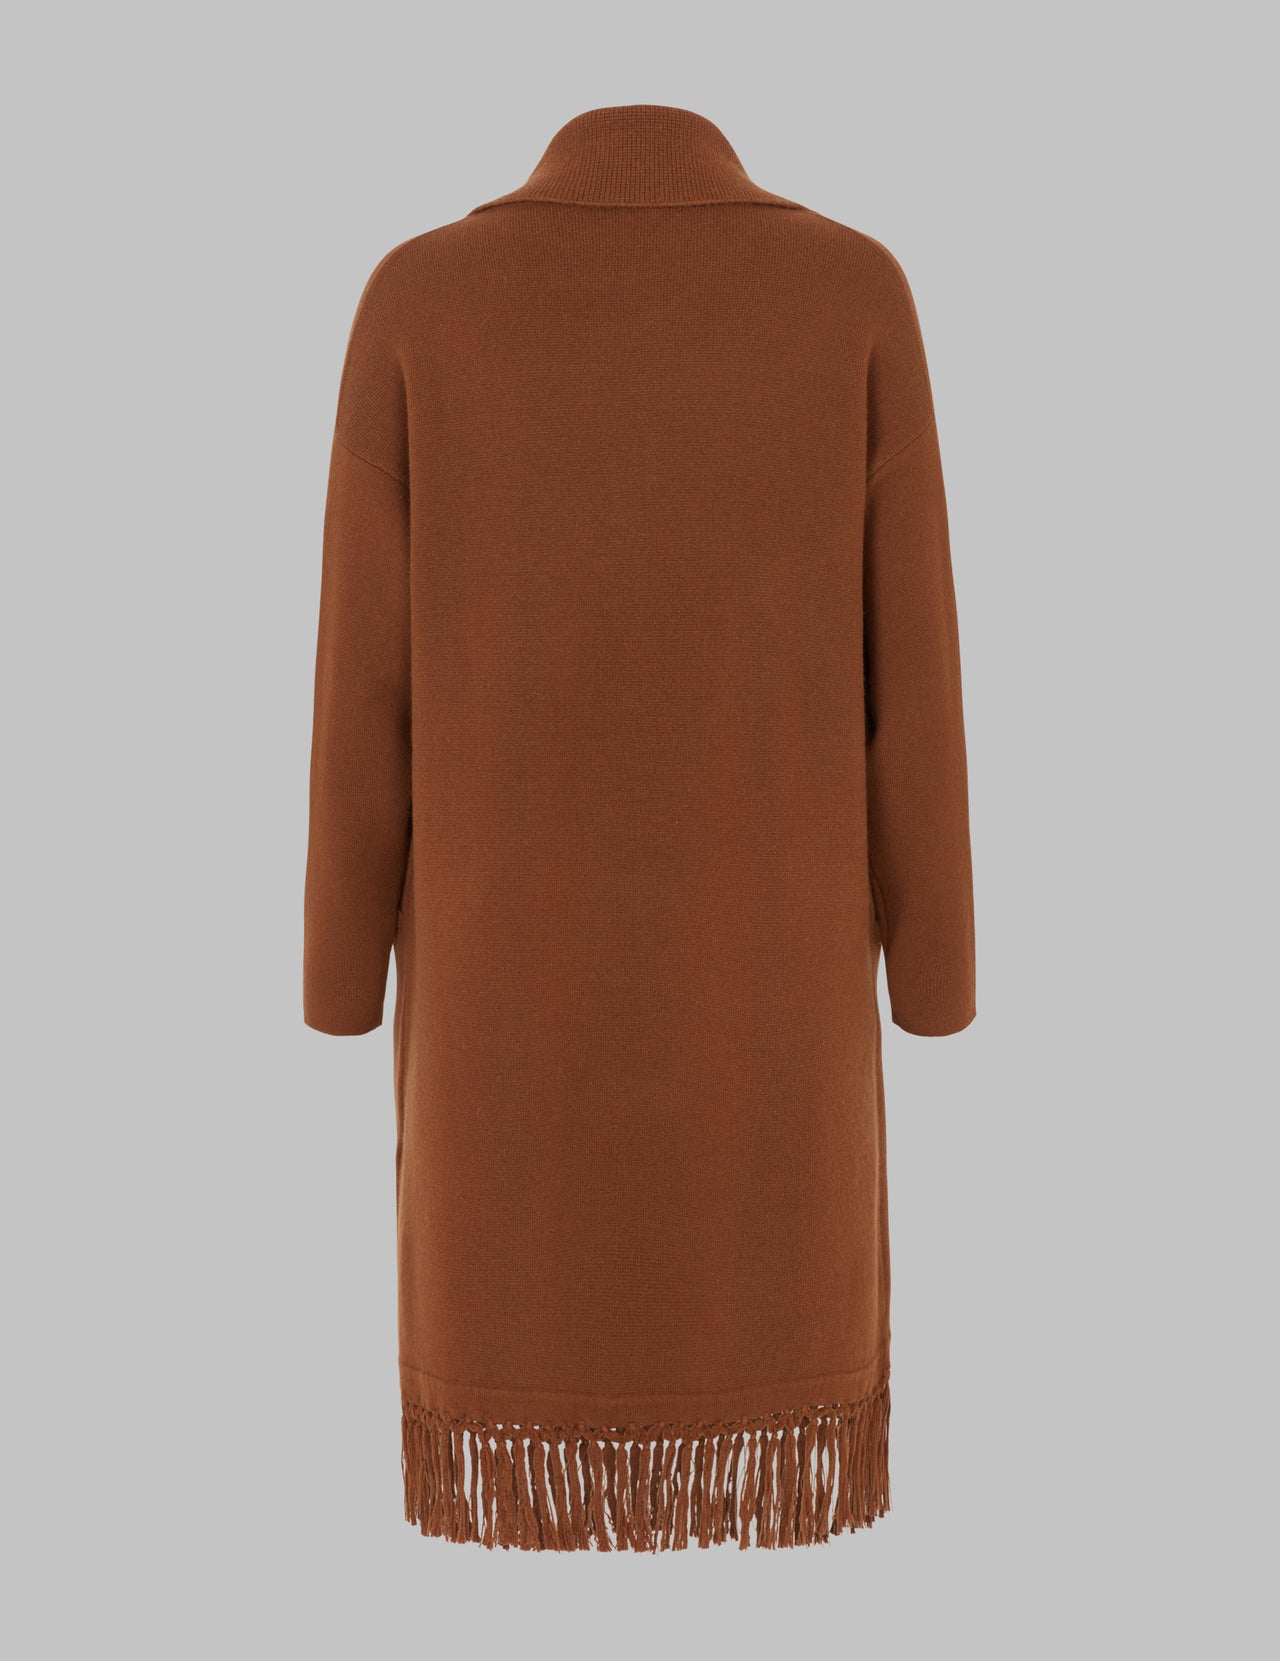  Syrup Brown Fringed Long Cashmere Cardigan 